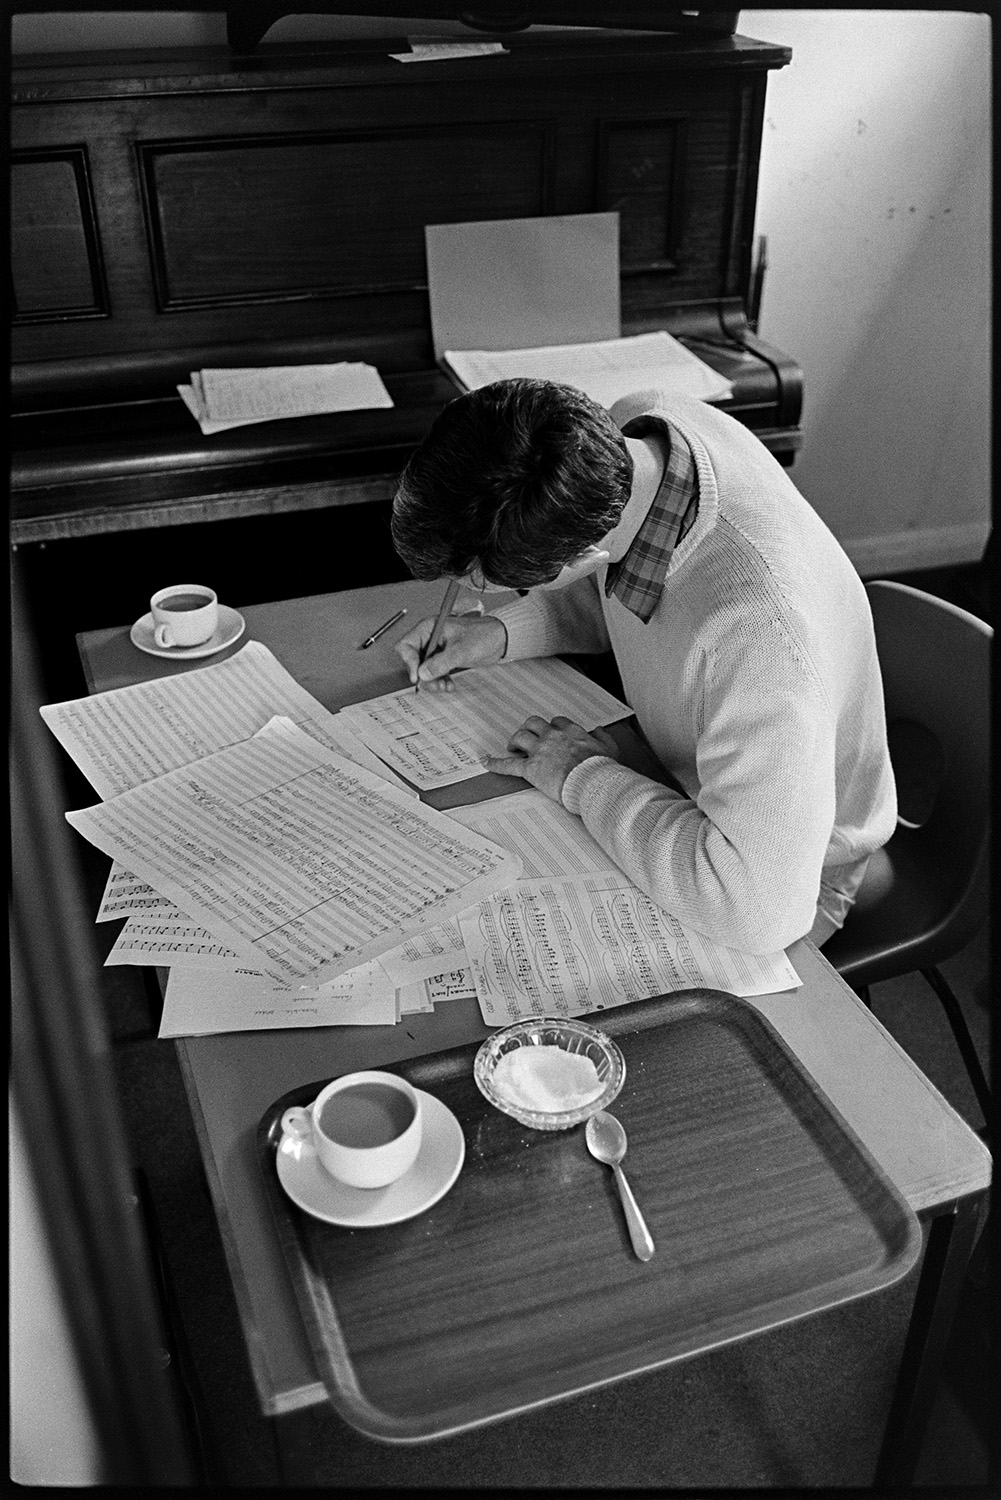 Music class in school, visiting teacher with staff and pupils playing music and advising. 
[Chris Williams writing out music on a desk at Holsworthy School. A tray with a cup of tea and bowl of sugar are beside him. An upright piano can be seen next to the desk.]